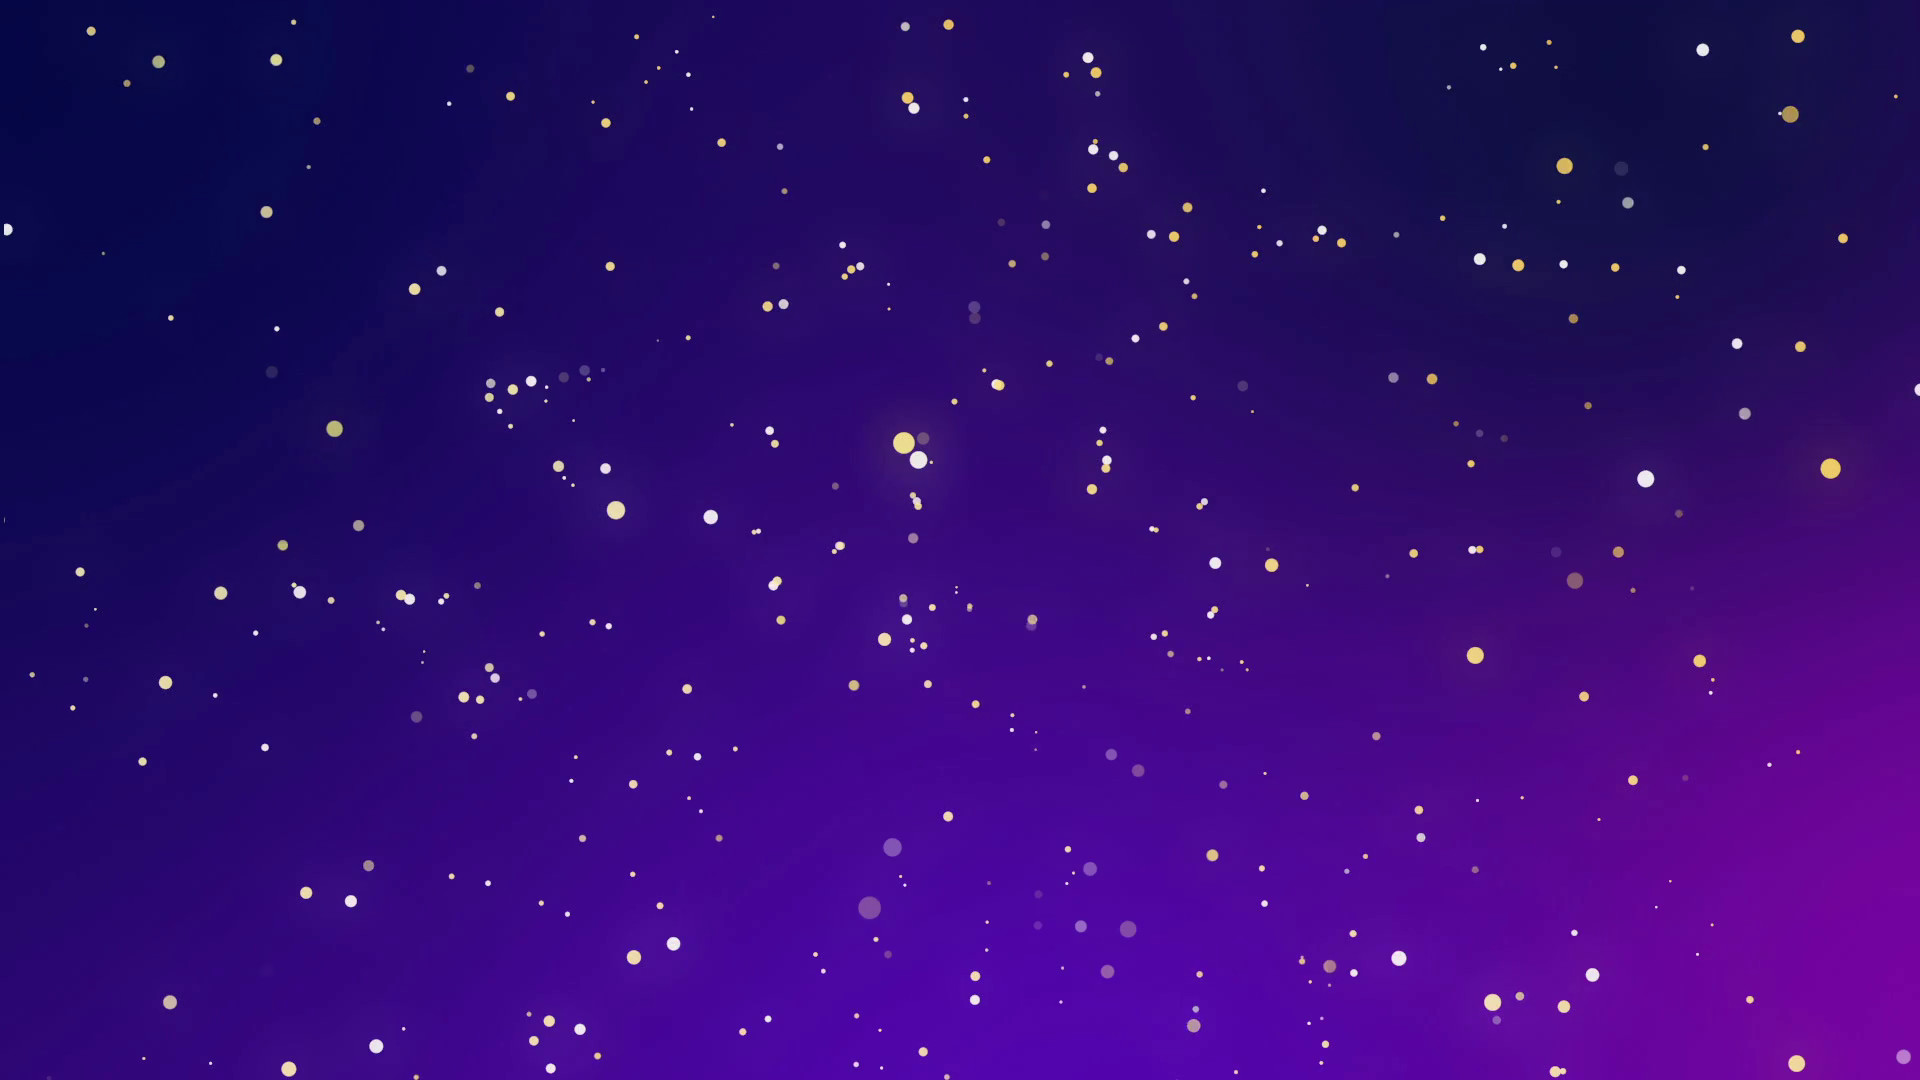 1920x1080 Subscription Library Festive Christmas purple blue gradient background with  glowing yellow white dot sparkles imitating a night sky